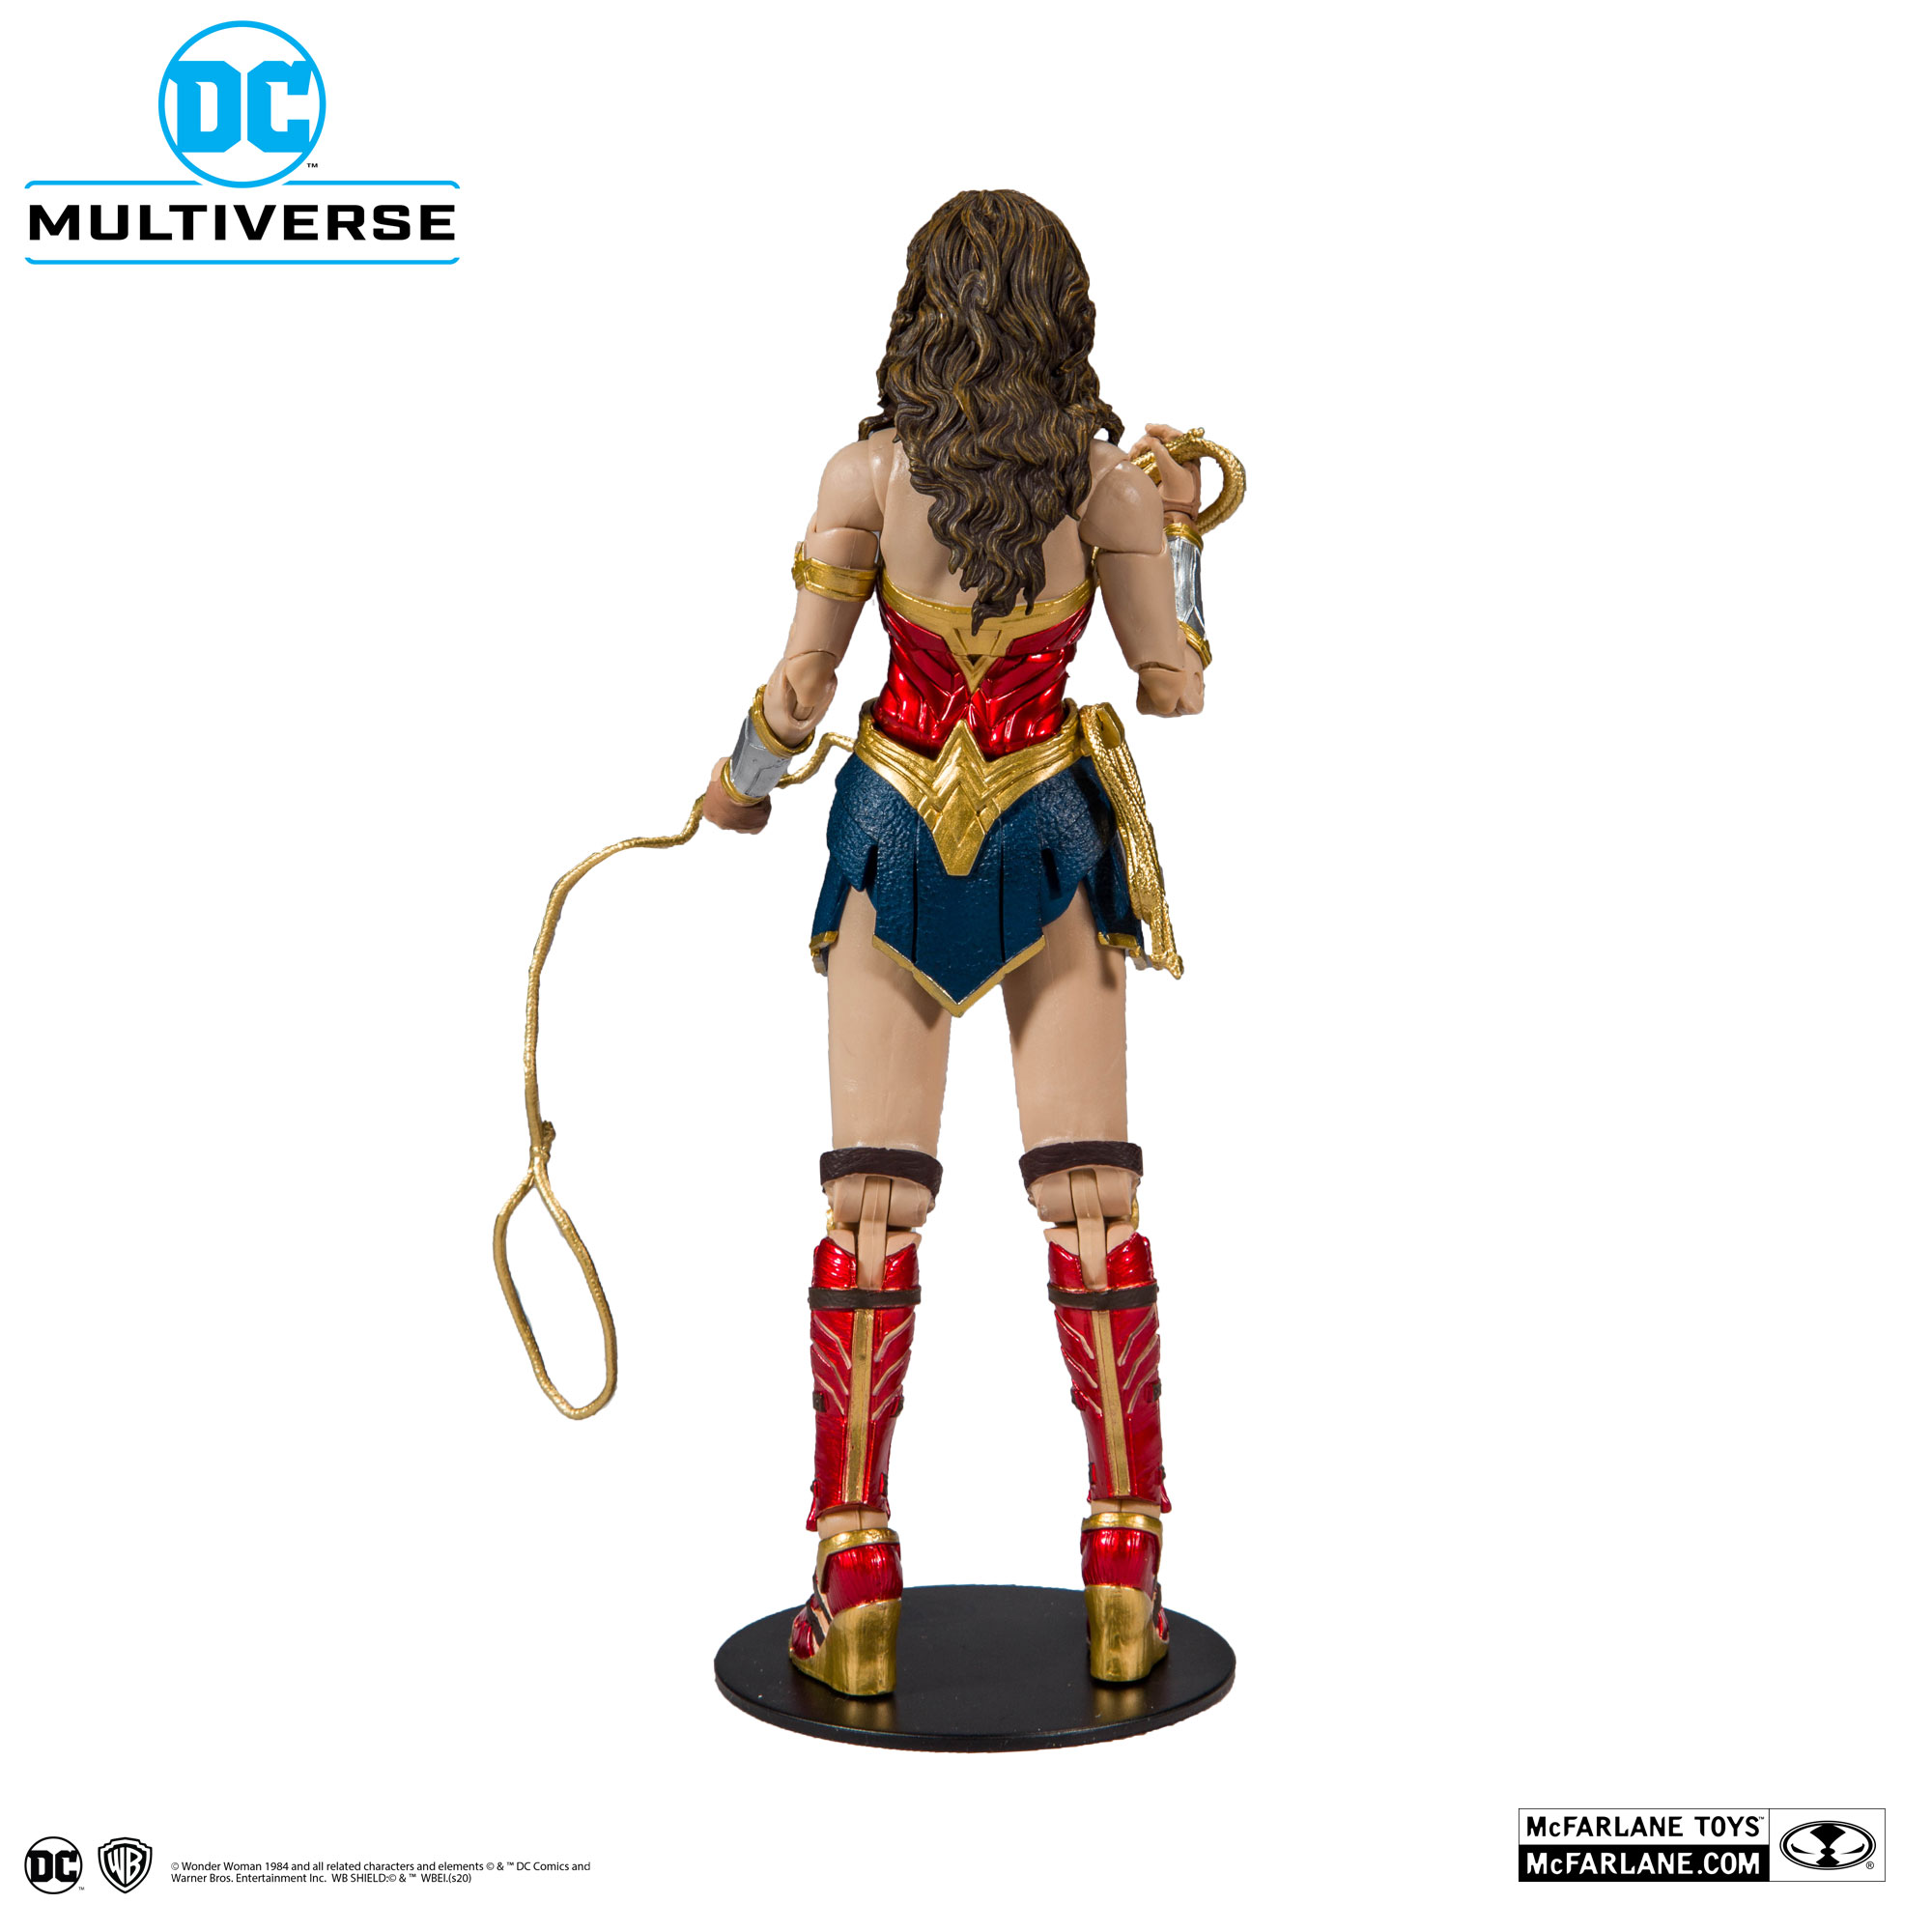 McFarlane Toys Wonder Woman 7 inch Action Figure 15123-7 for sale online 